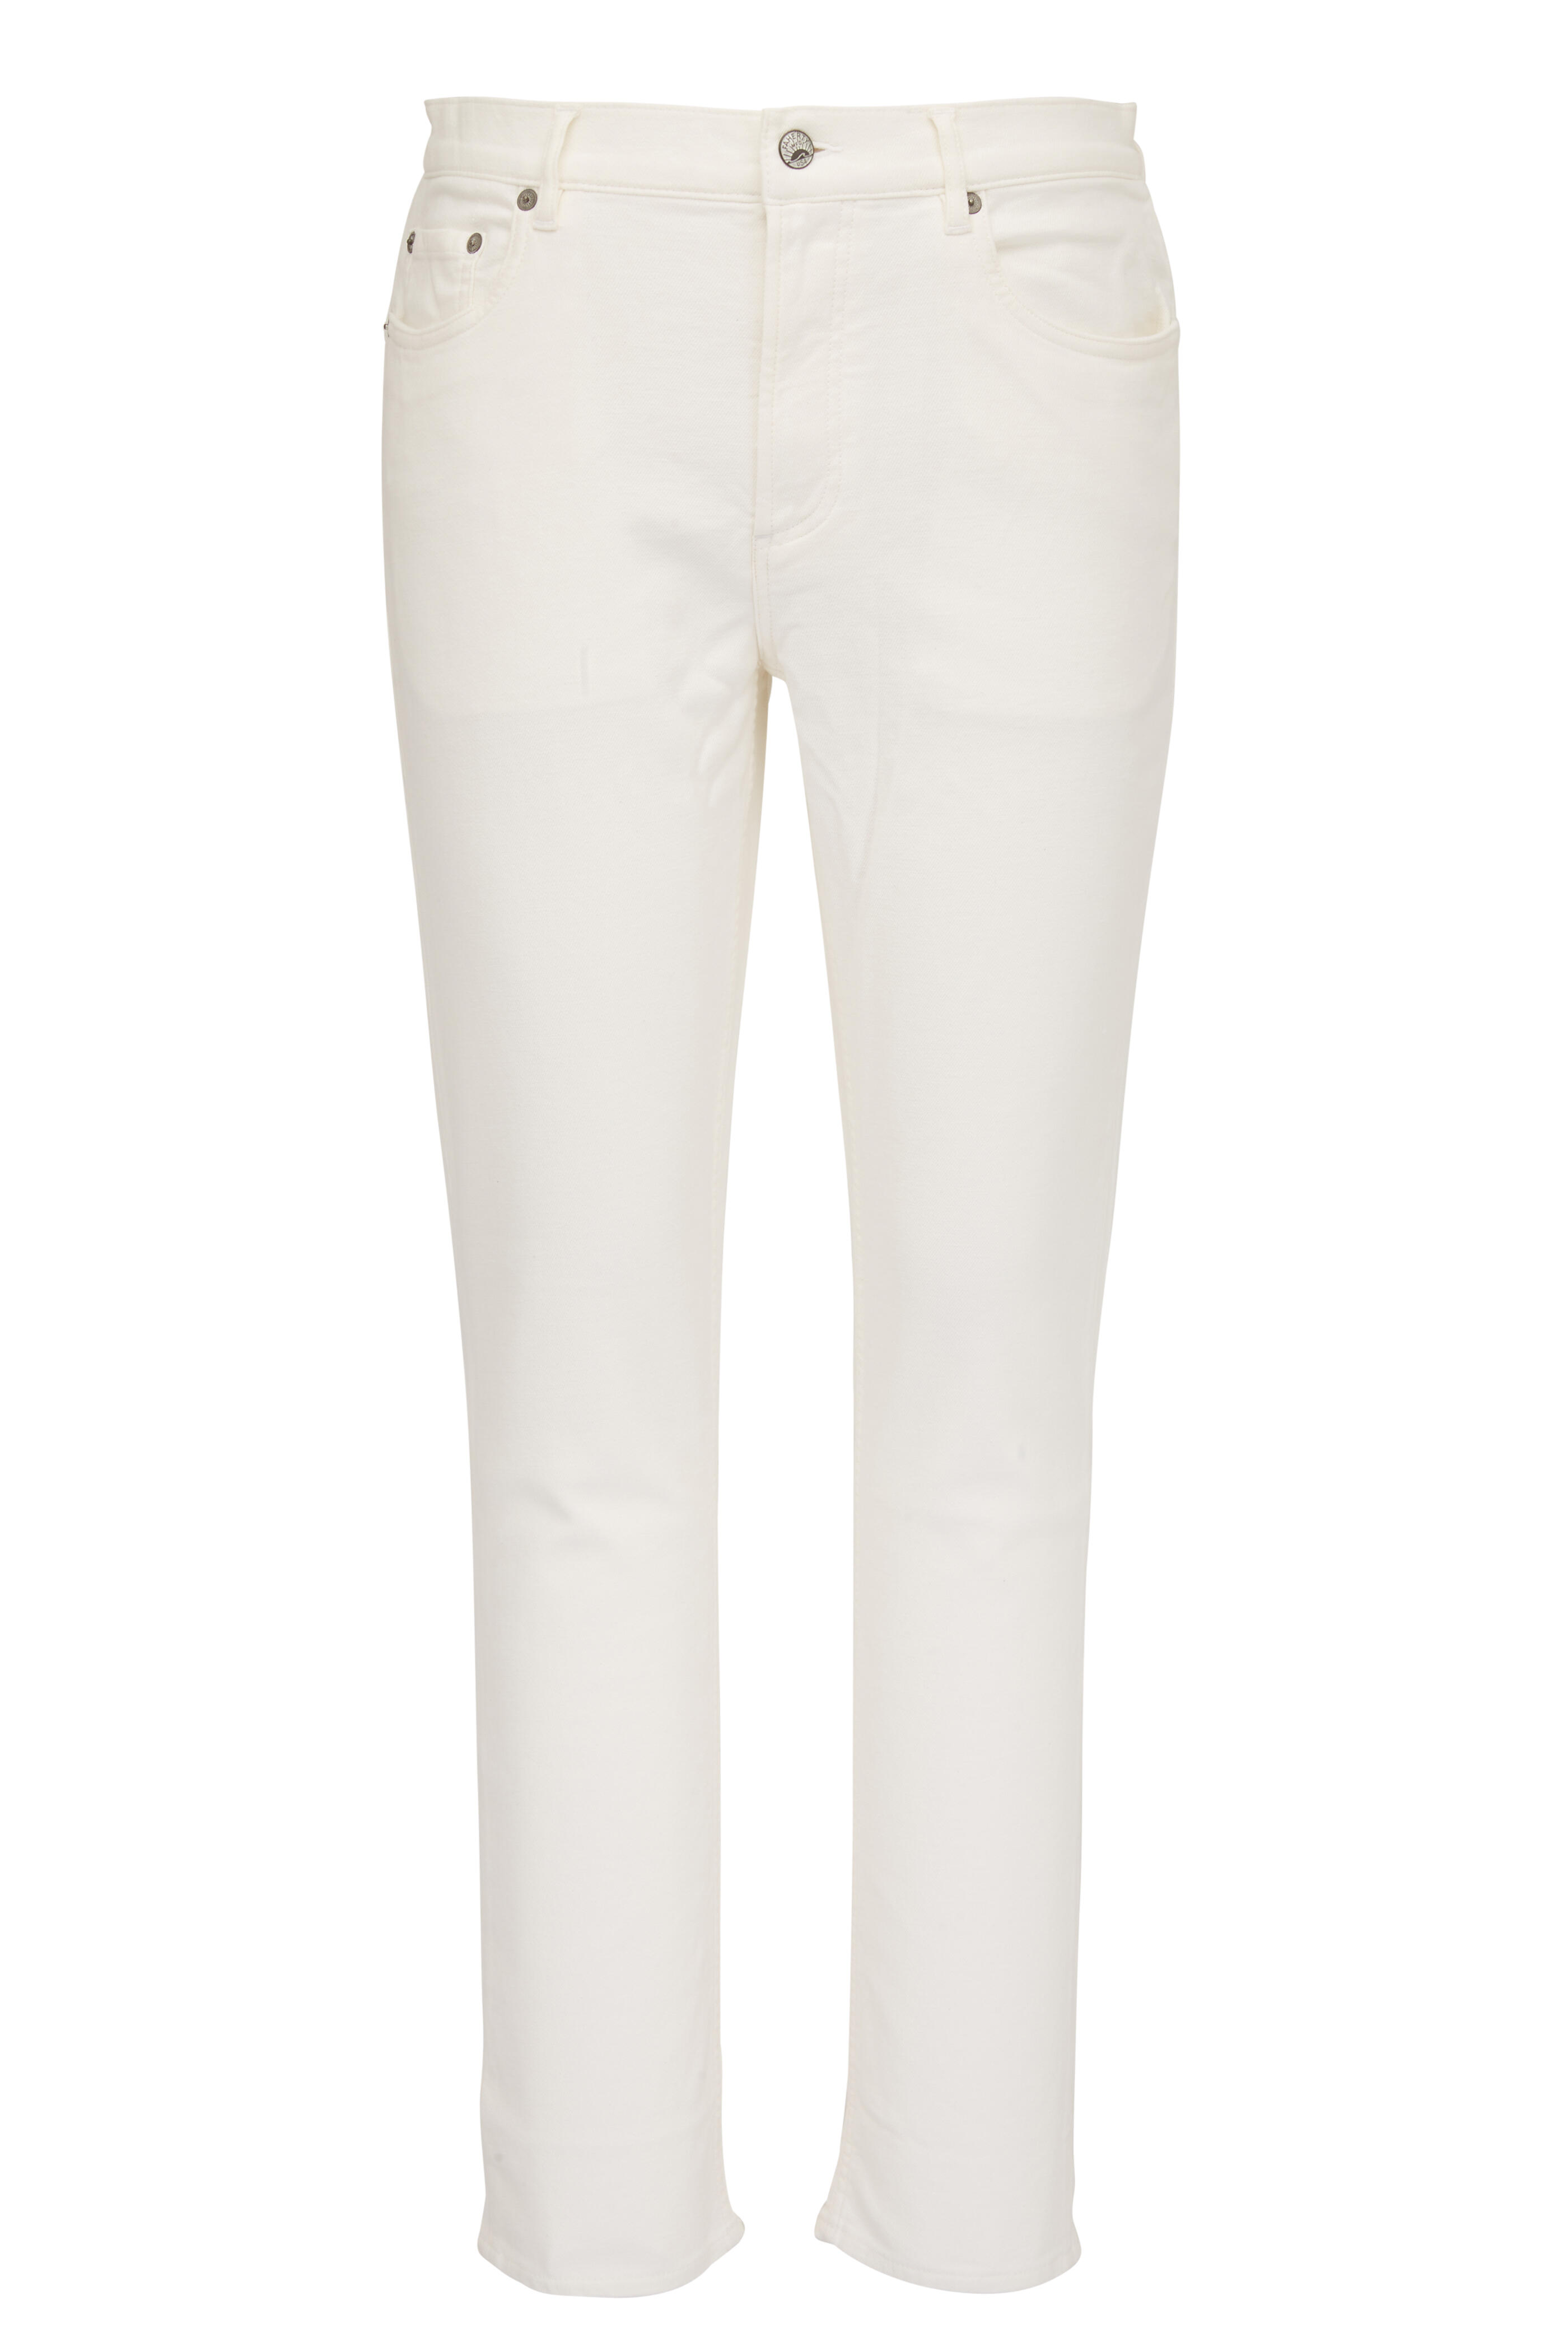 Faherty Brand - Cabo Blanco Stretch Terry Five Pocket Pant